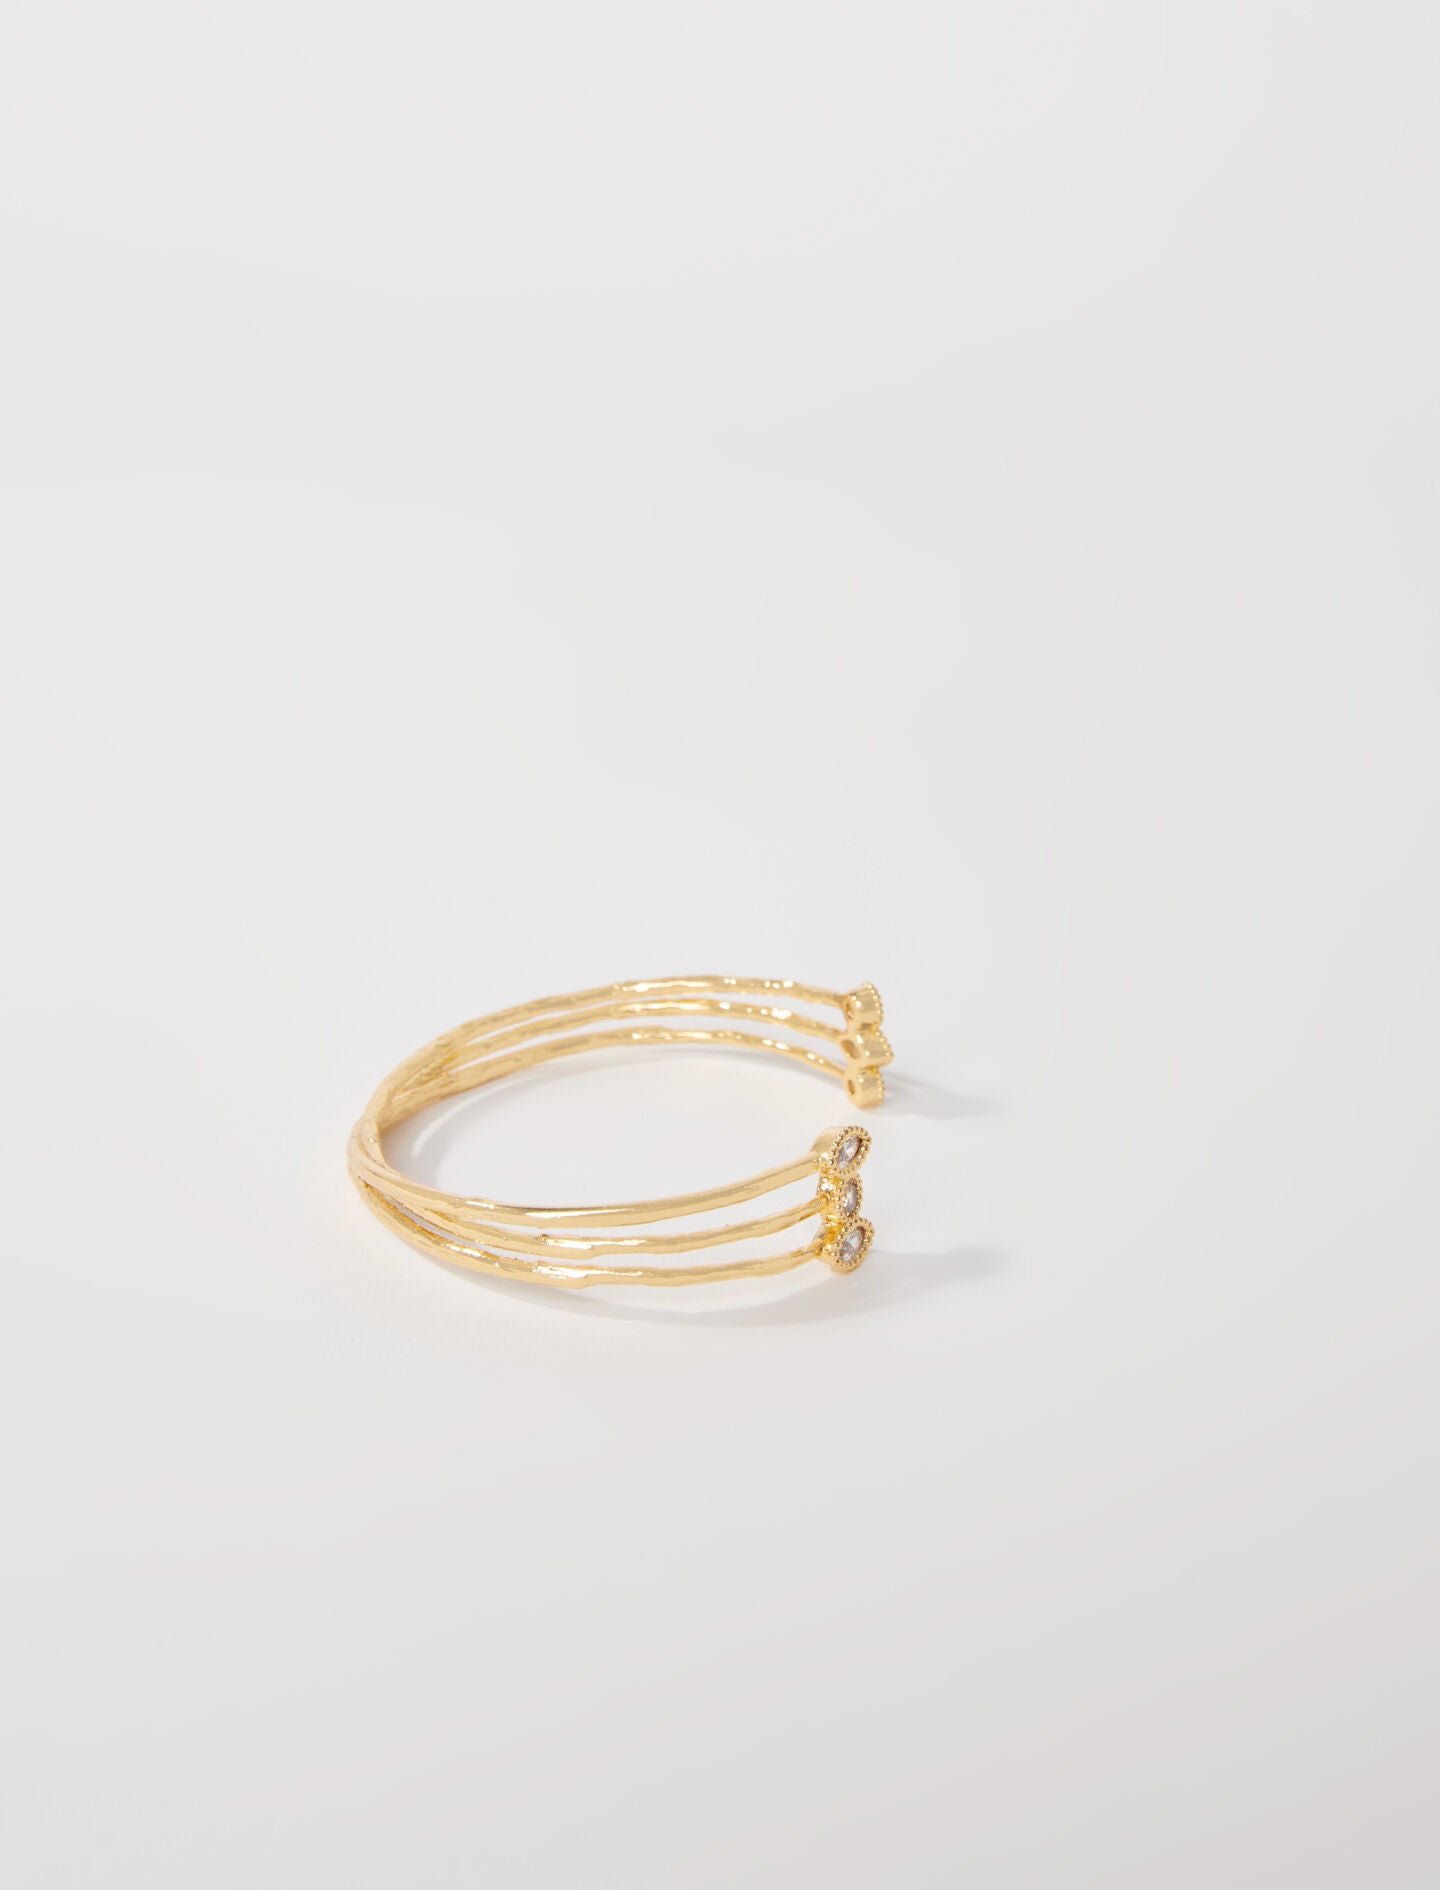 Gold-gold-plated recycled brass bracelet